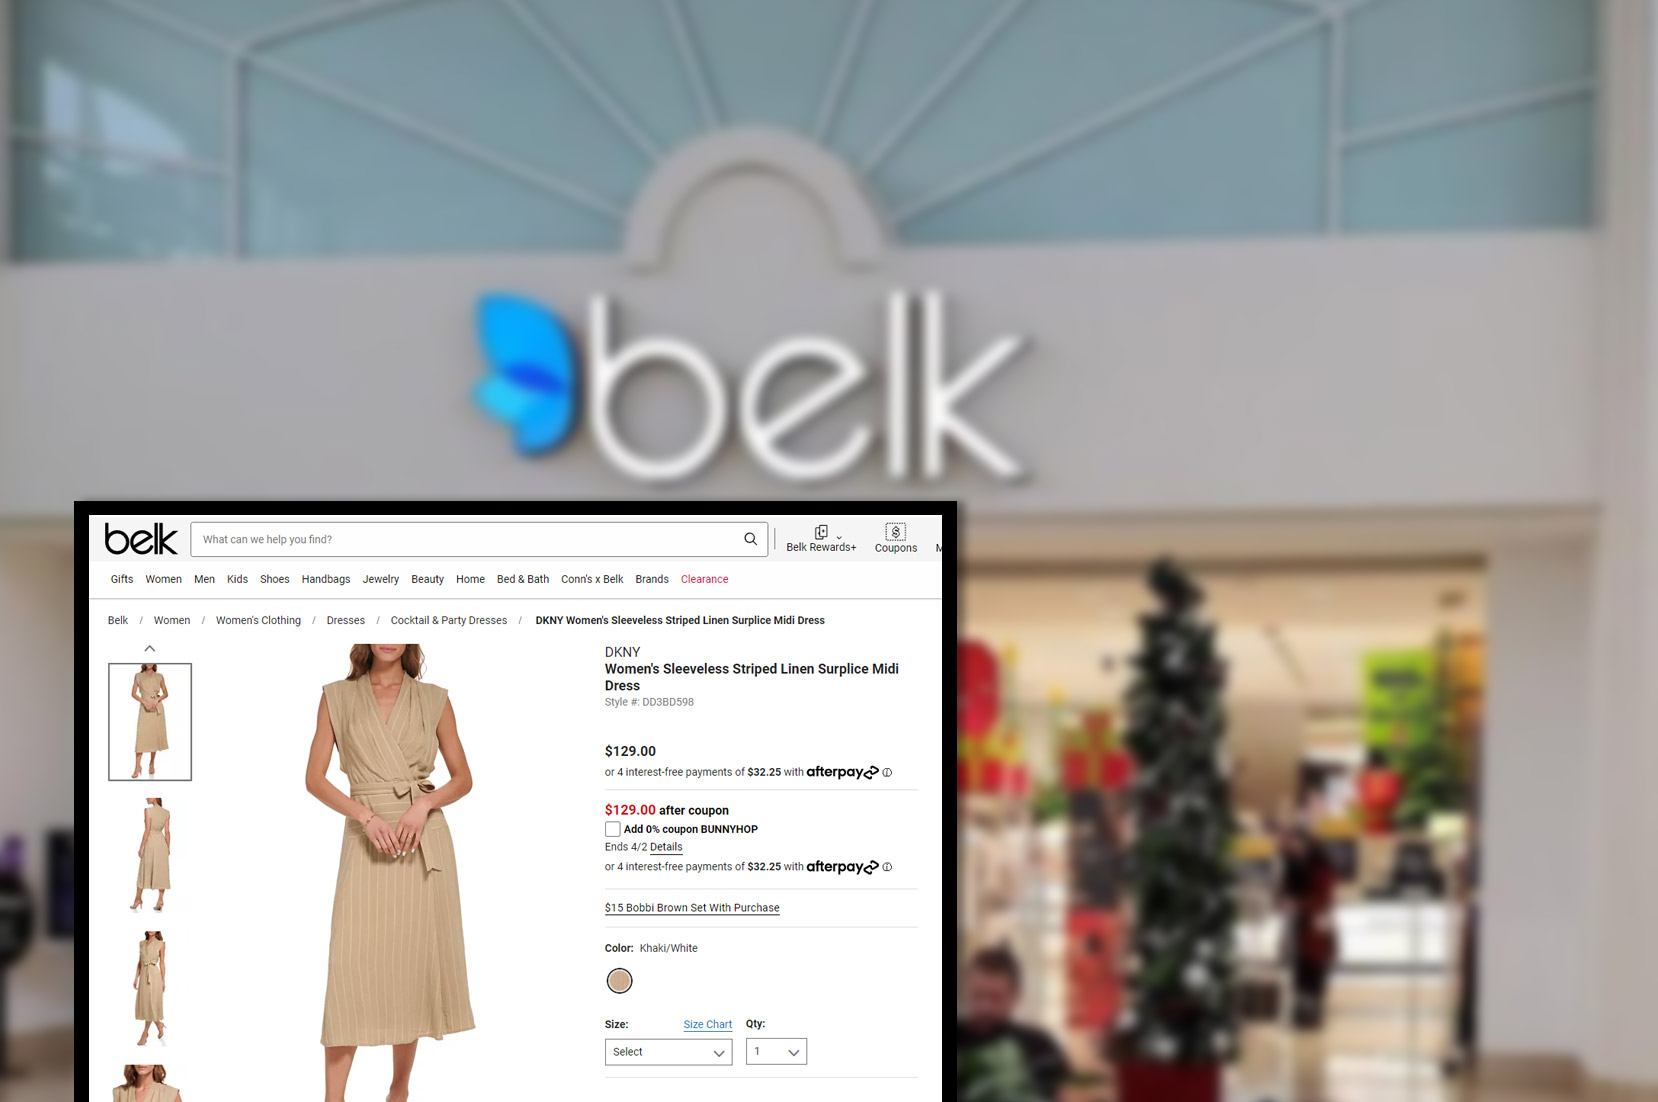 belk-comproduct-pricing-information-and-image-scraping-services